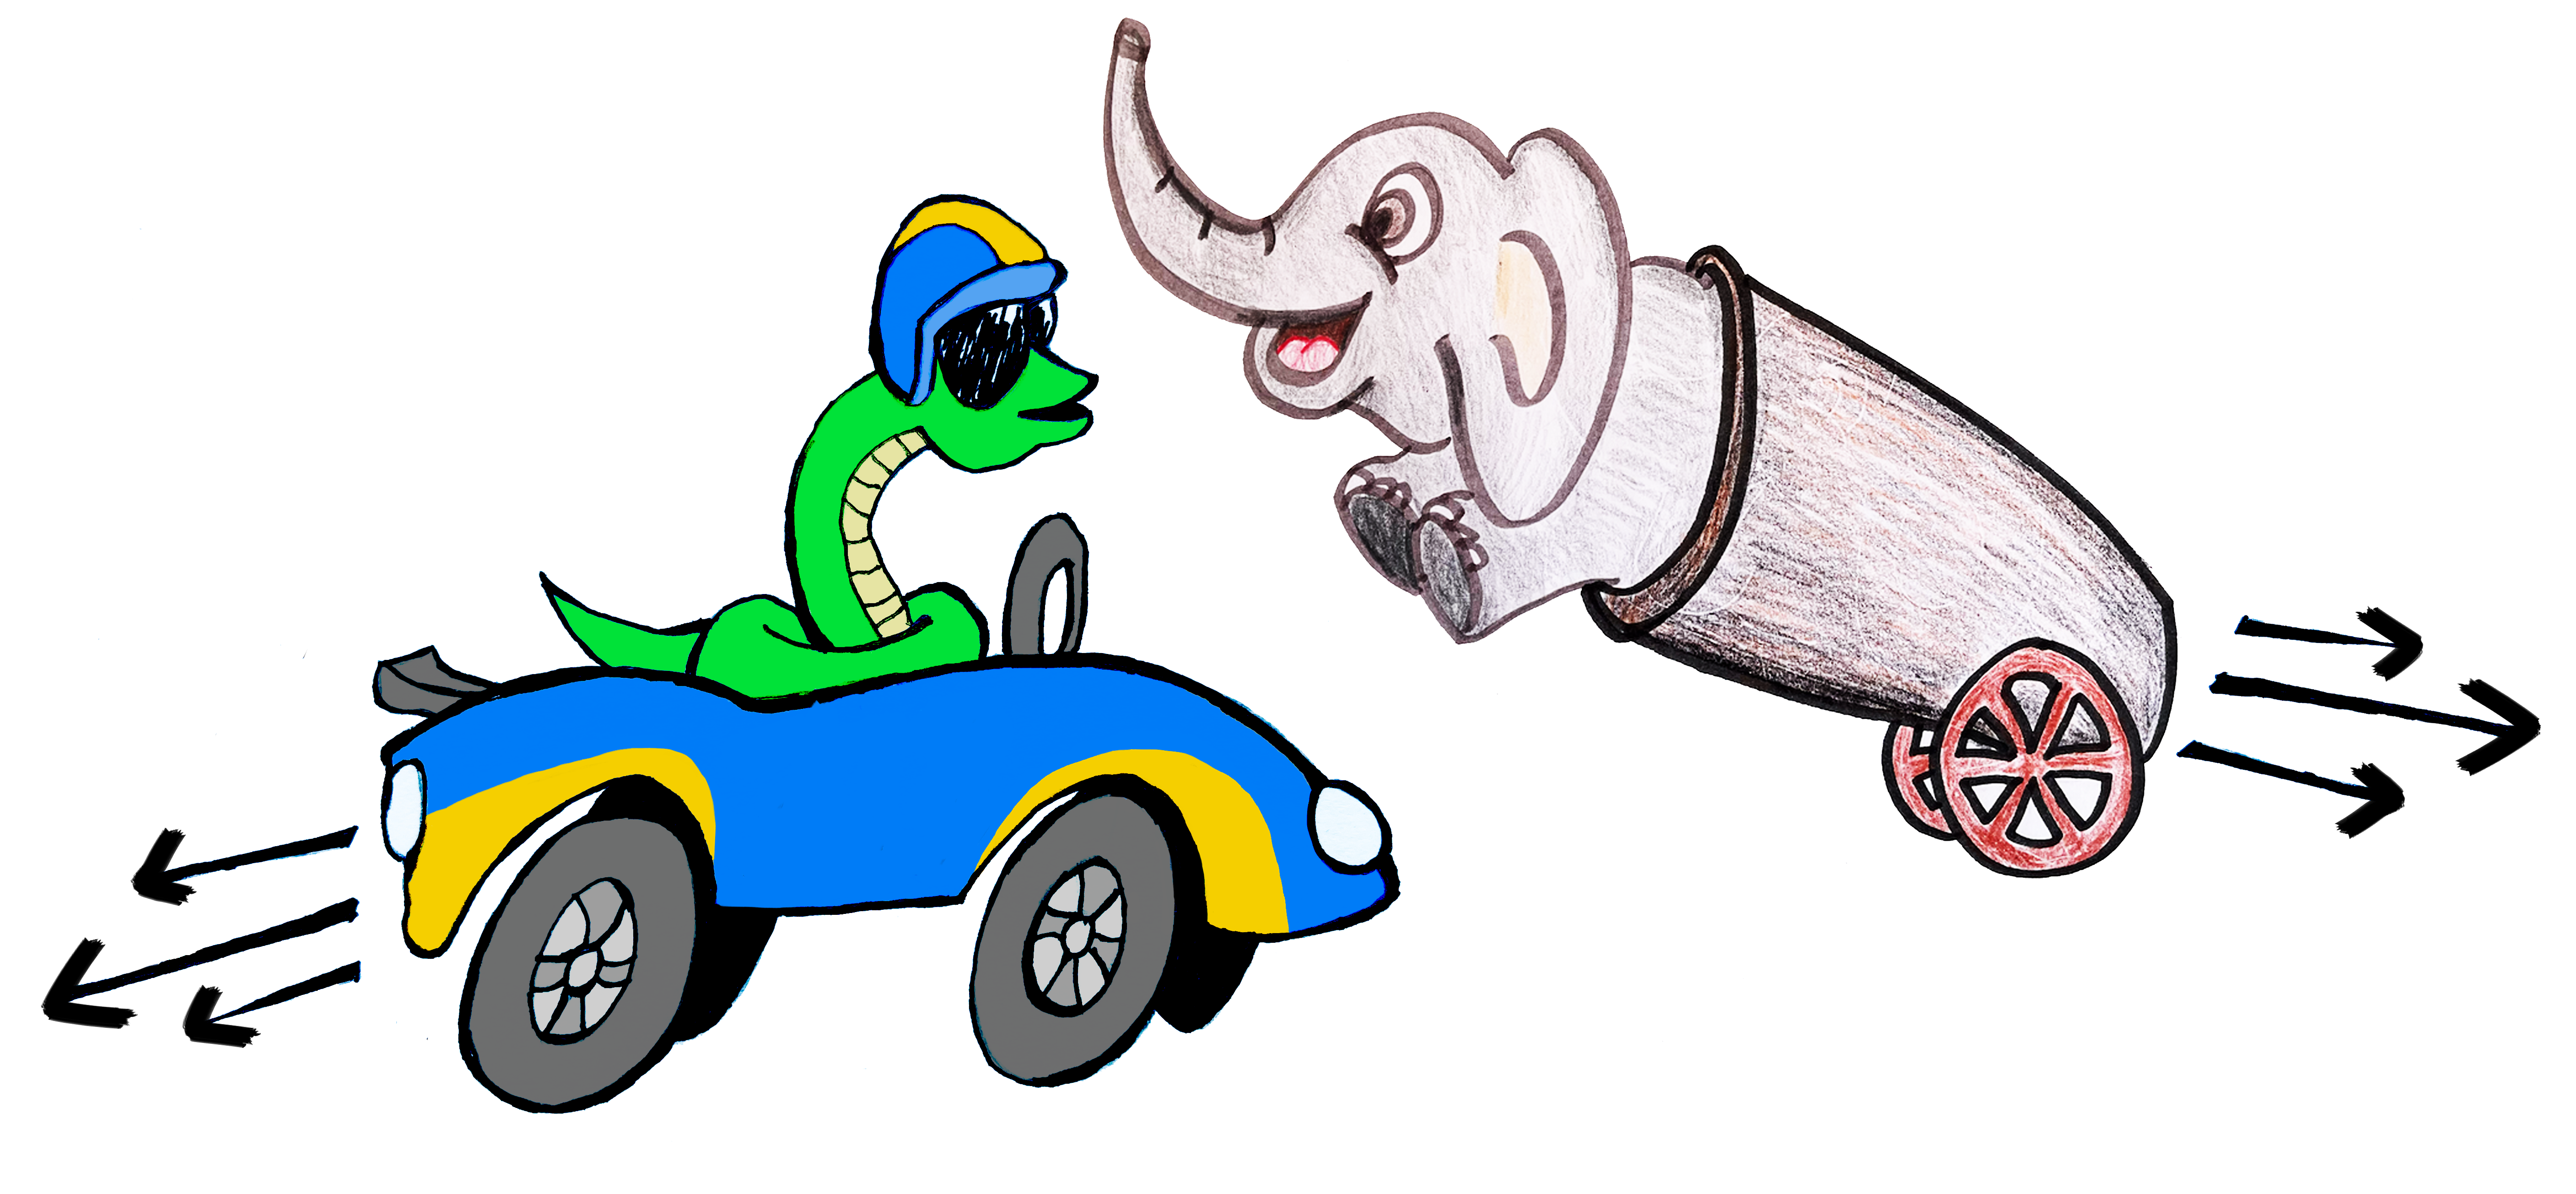 Python in a fast car with an elephant in a cannon, with vectors coming out of them